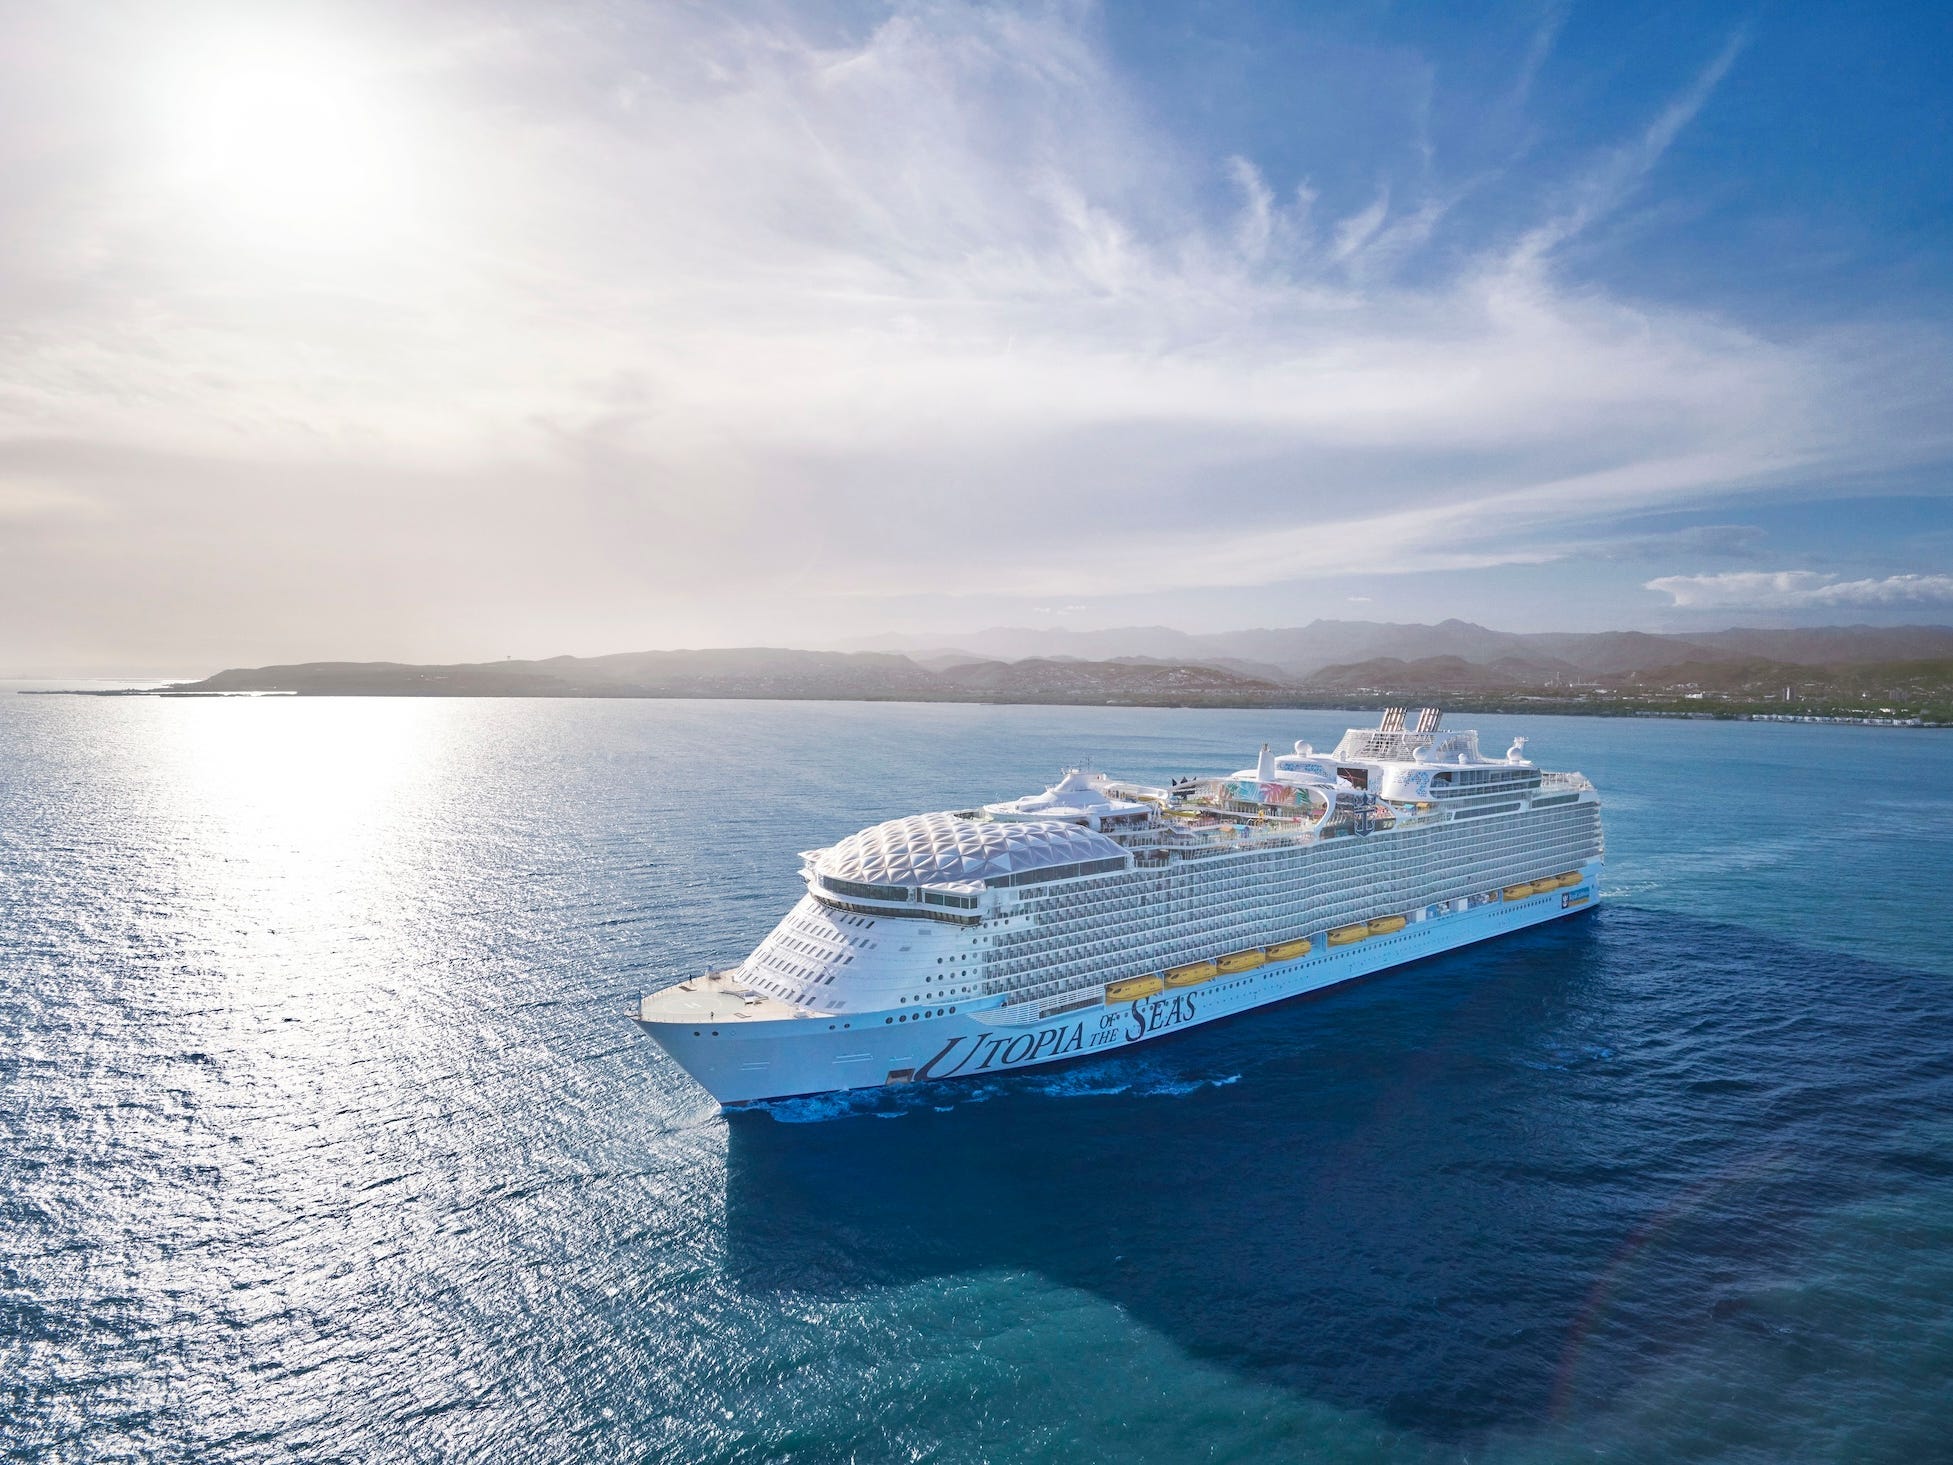 <ul class="summary-list"><li>Royal Caribbean's latest mega-ship is now operating short Caribbean itineraries.</li><li>At 236,860 gross tons, Utopia of the Seas is now the world's second-largest cruise ship.</li><li>The ship has new dining concepts but fewer pools and waterslides than <a href="https://www.businessinsider.com/royal-caribbean-icon-of-the-seas-cruise-ship-top-tips-2024-1">Icon of the Seas</a>.</li></ul><p>Step aside, <a href="https://www.businessinsider.com/royal-caribbean-icon-of-the-seas-cruise-ship-photo-tour-2024-1">Icon of the Seas</a> — there's a new giant cruise ship in Florida. And it's already attracting weekend warriors with a new ultra-long slide, food truck, and omakase dinner.</p><p>Royal Caribbean's new 236,860-gross-ton <a href="https://www.businessinsider.com/new-royal-caribbean-giant-cruise-ship-utopia-of-seas-photos-2024-2">Utopia of the Seas</a> embarked on its maiden voyage on Friday, marking the launch of the world's second-largest cruise ship.</p><p>For some travelers, the mega-ship's arrival at its homeport in <a href="https://www.businessinsider.com/port-canaveral-florida-expansion-worlds-largest-cruise-ships-2024-5">Port Canaveral</a>, Florida, has been a long time coming. In April, Michael Bayley, president and CEO of Royal Caribbean International, said the company had seen "extraordinary" demand for the new floating hotel.</p><div class="read-original">Read the original article on <a href="https://www.businessinsider.com/royal-caribbean-utopia-of-the-seas-vs-icon-new-ship-2024-7">Business Insider</a></div>